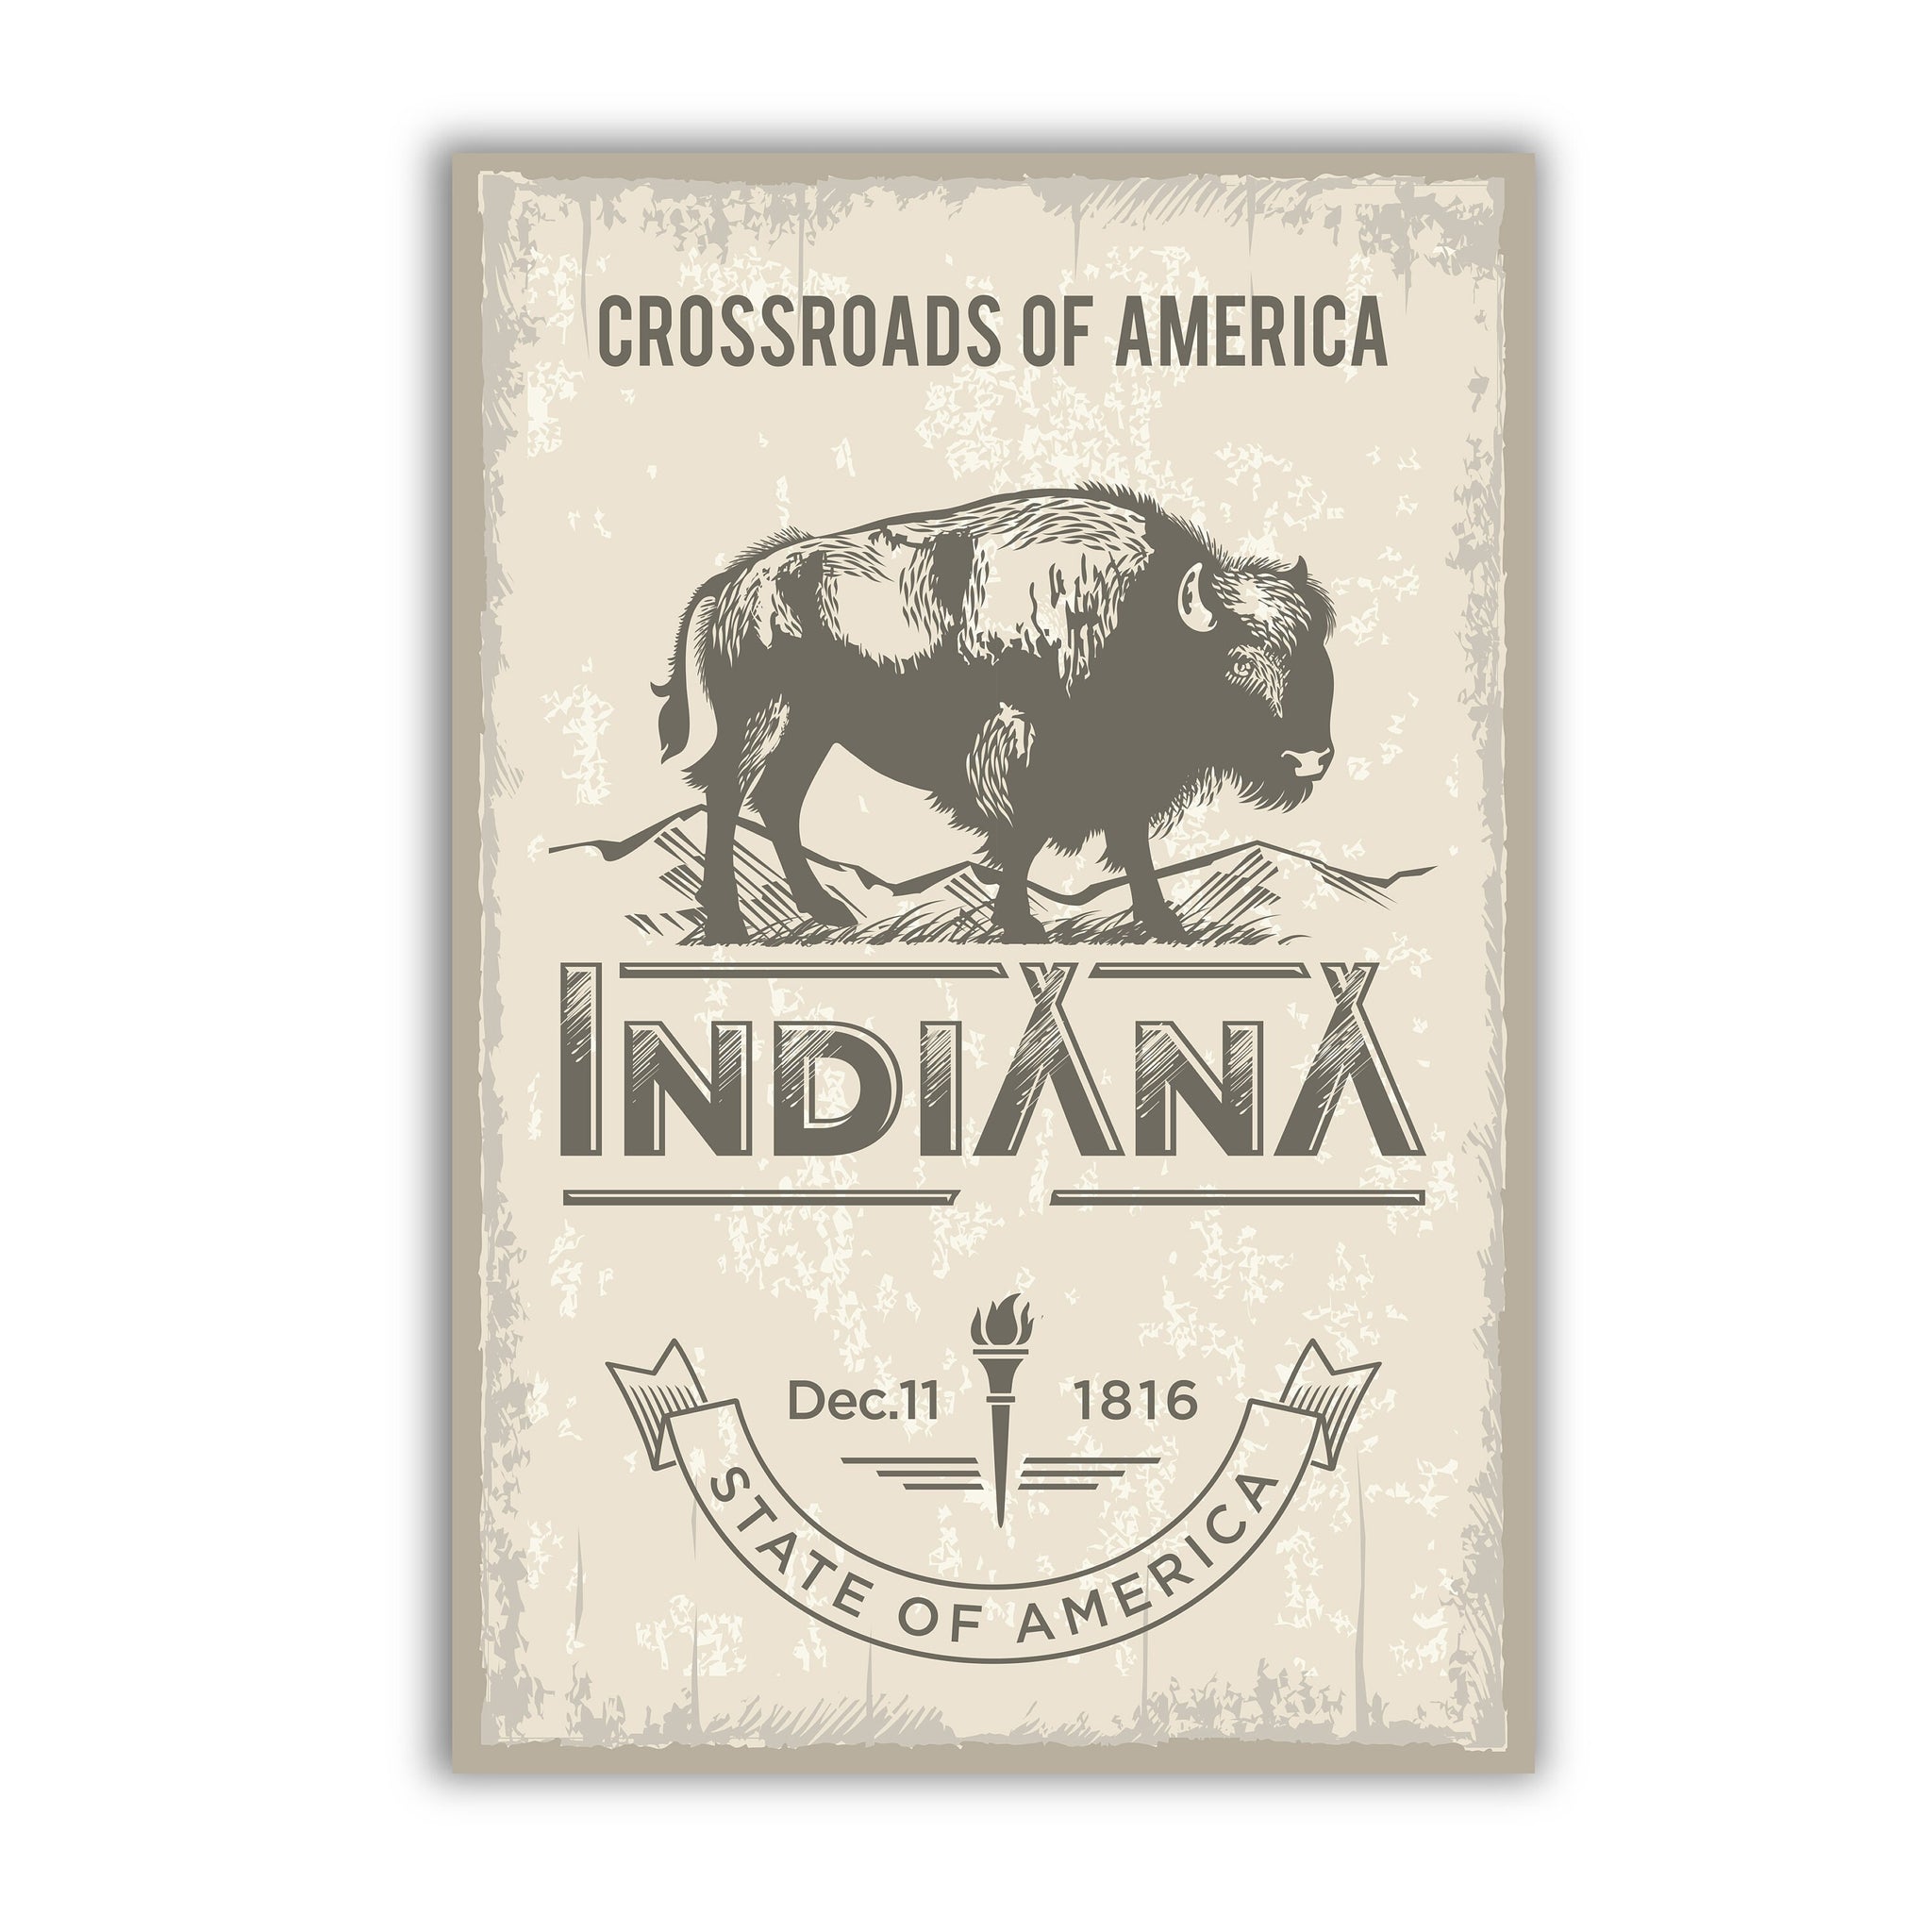 Indiana State Symbol Poster, Indiana State Poster Print, Indiana State Emblem Poster, Retro Travel State Poster, Home and Office Wall Art